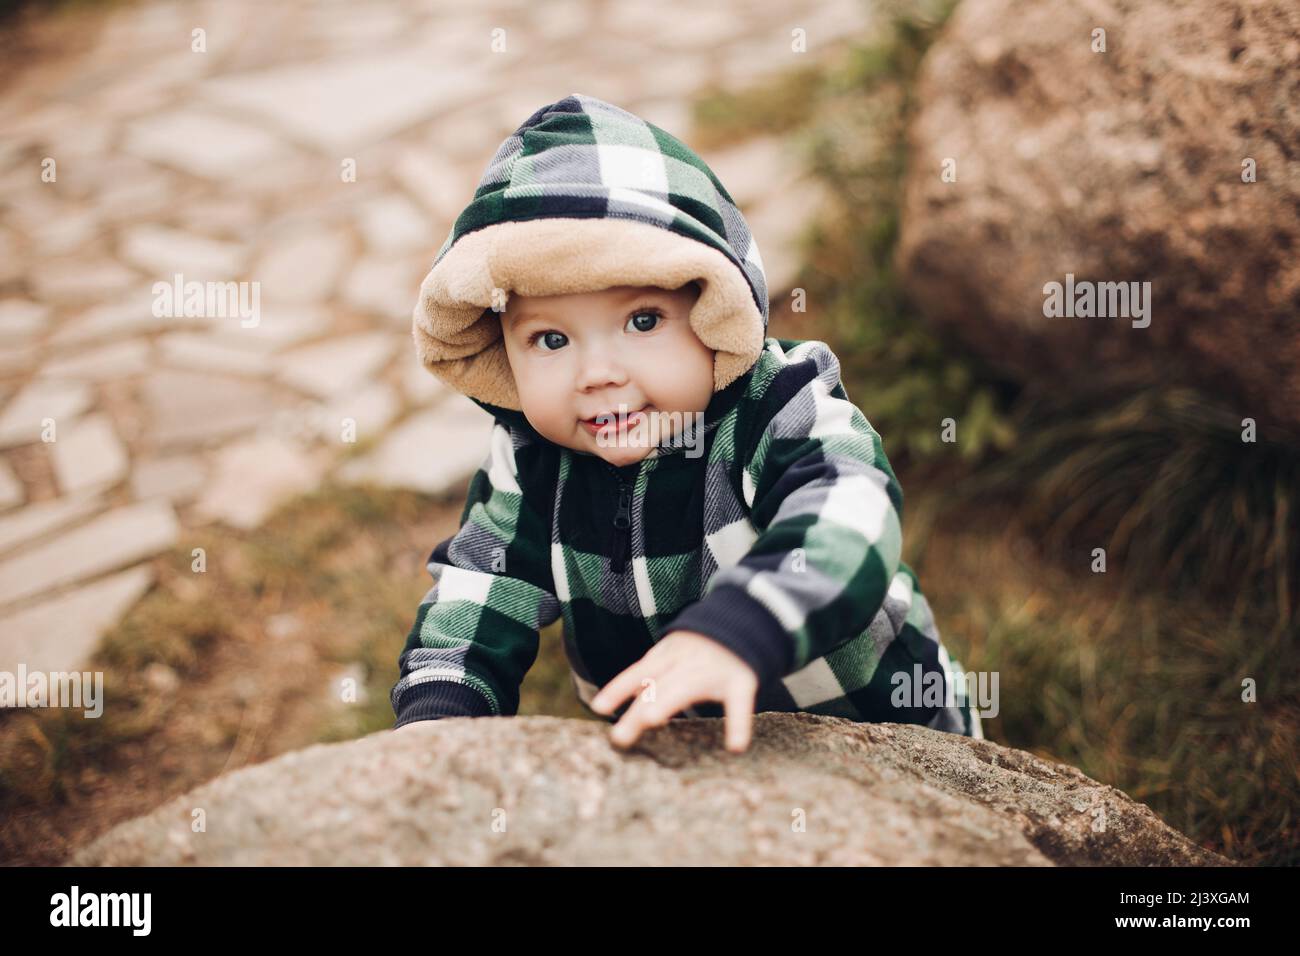 Adorable baby in warm overall with hood sitting on foliage Stock Photo -  Alamy